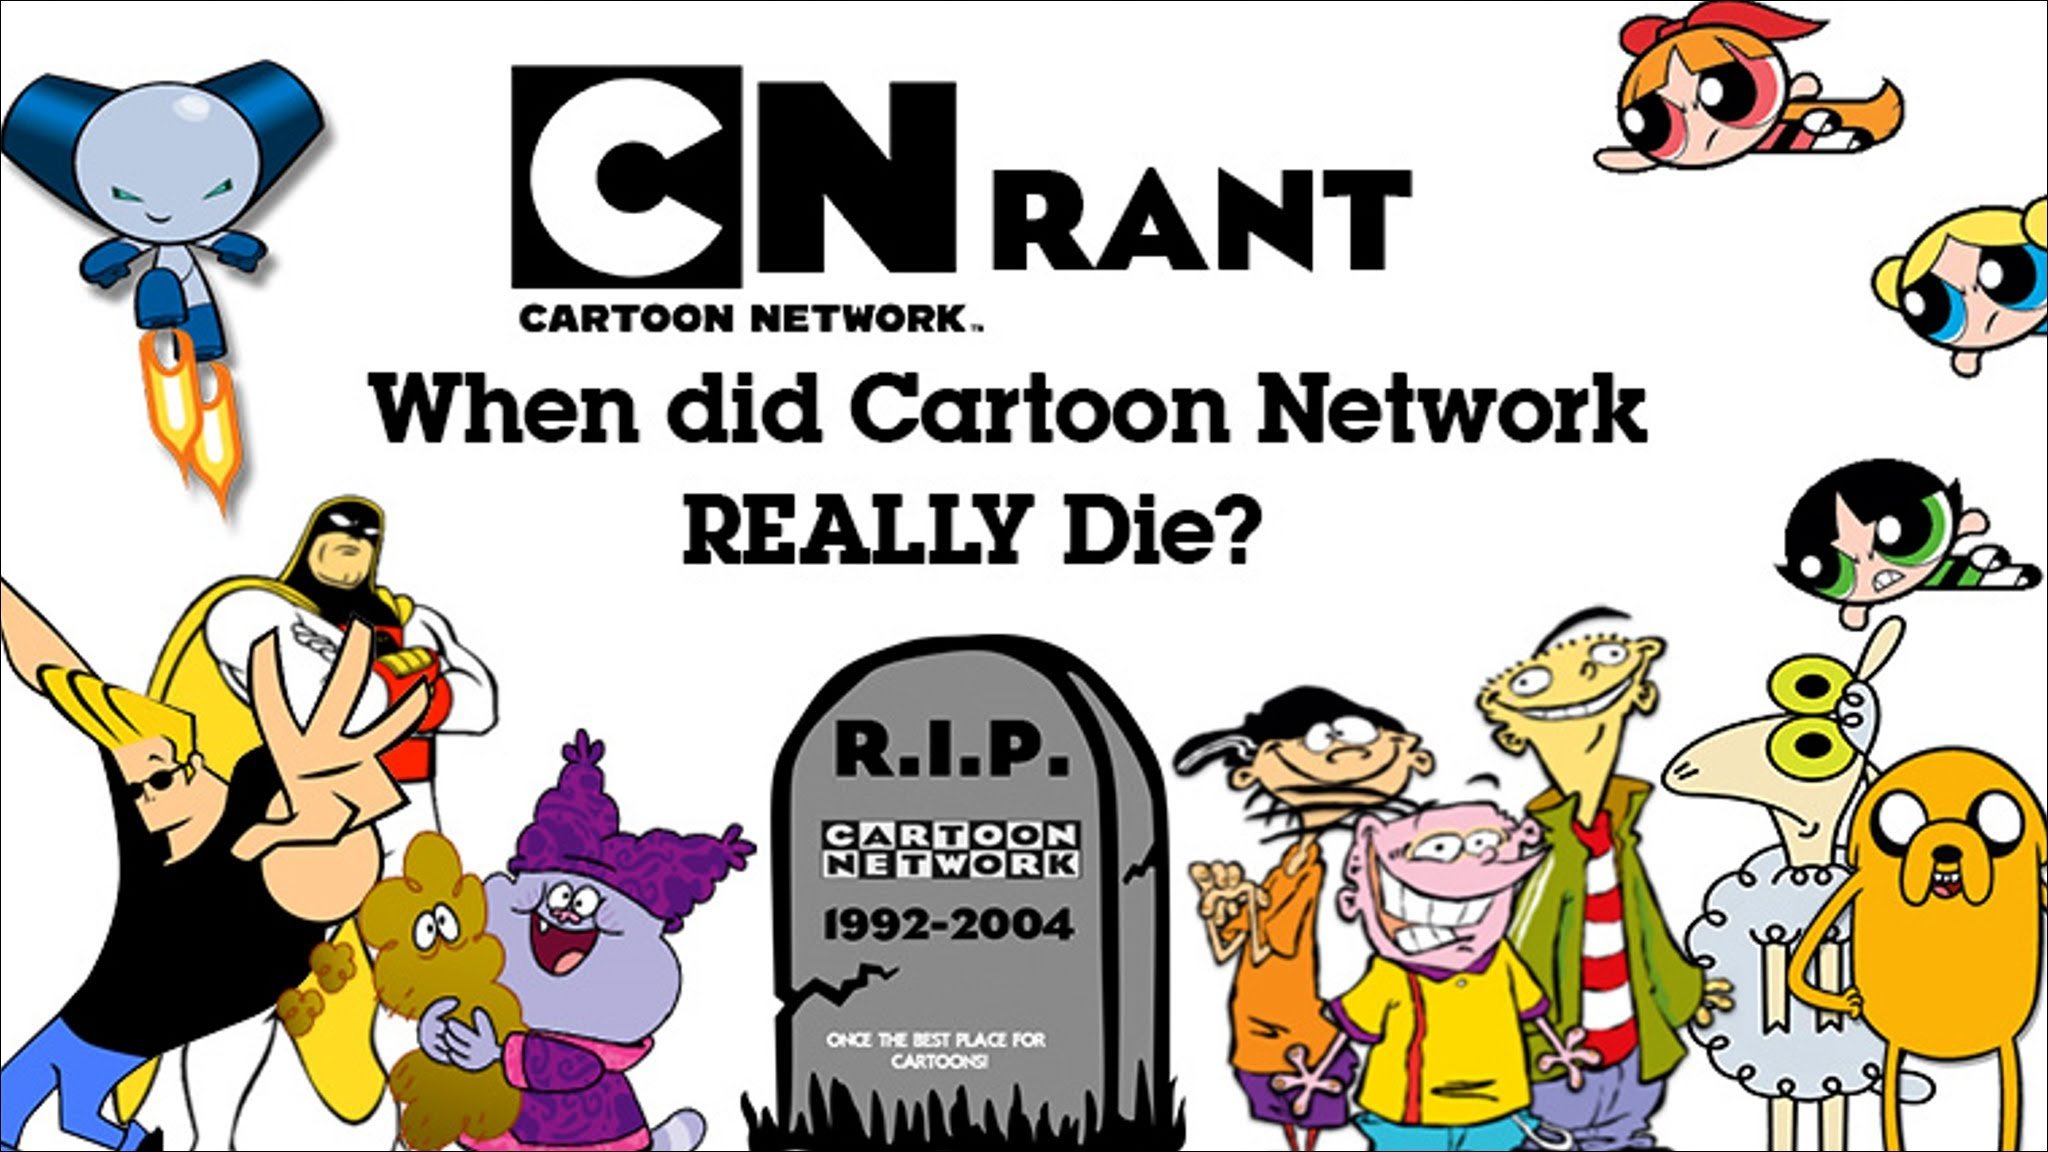 Cartoon Network Grew up, and We Miss the Brilliance That It Entailed